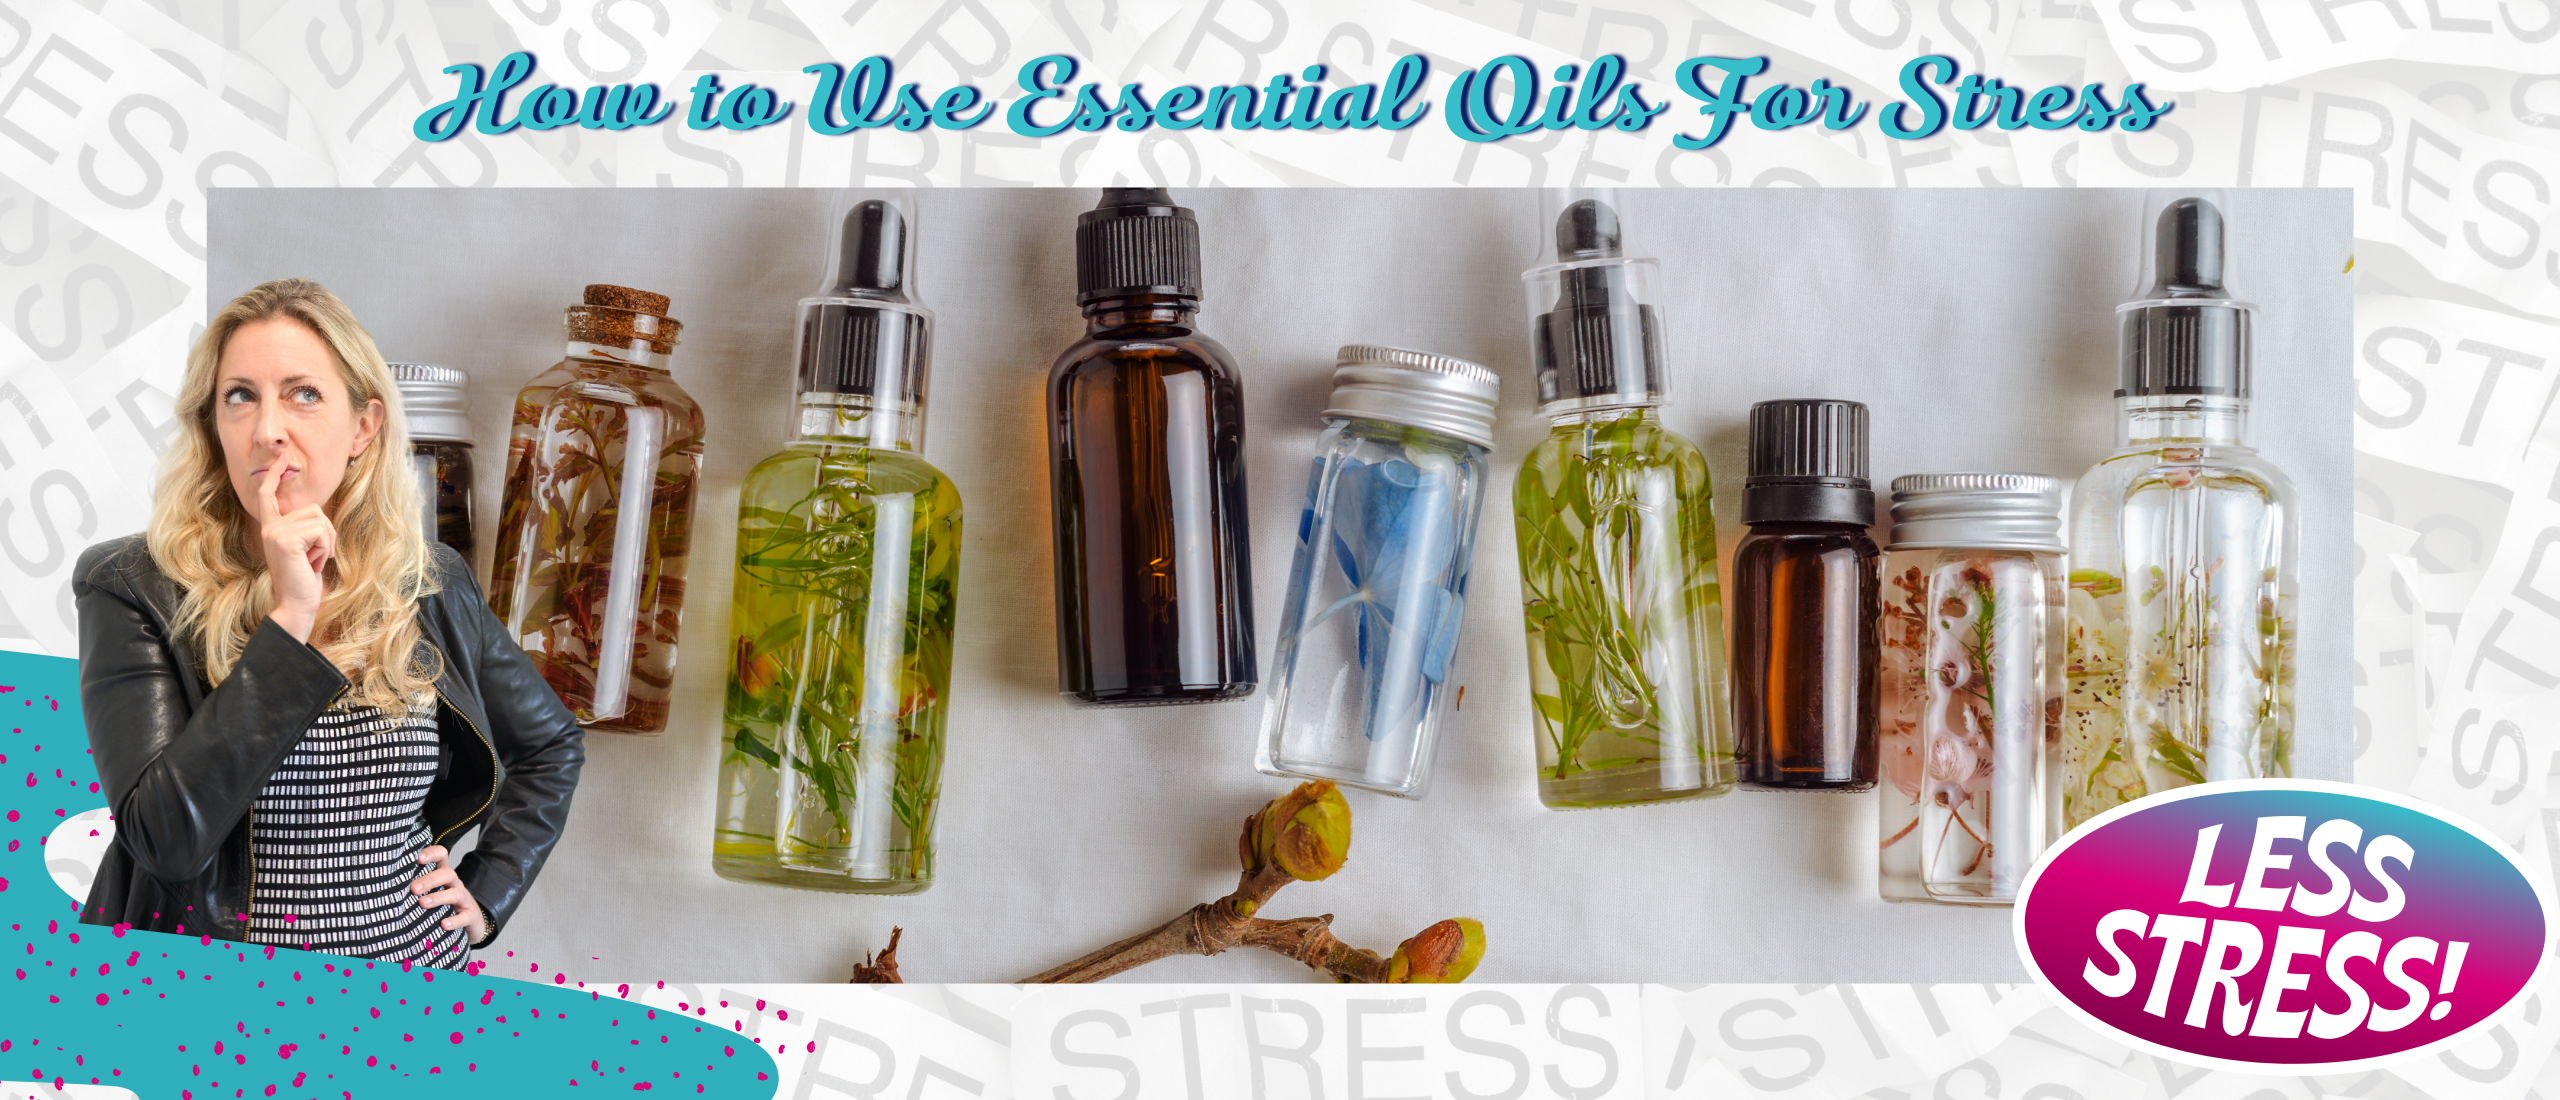 How to Use Essential Oils for Stress